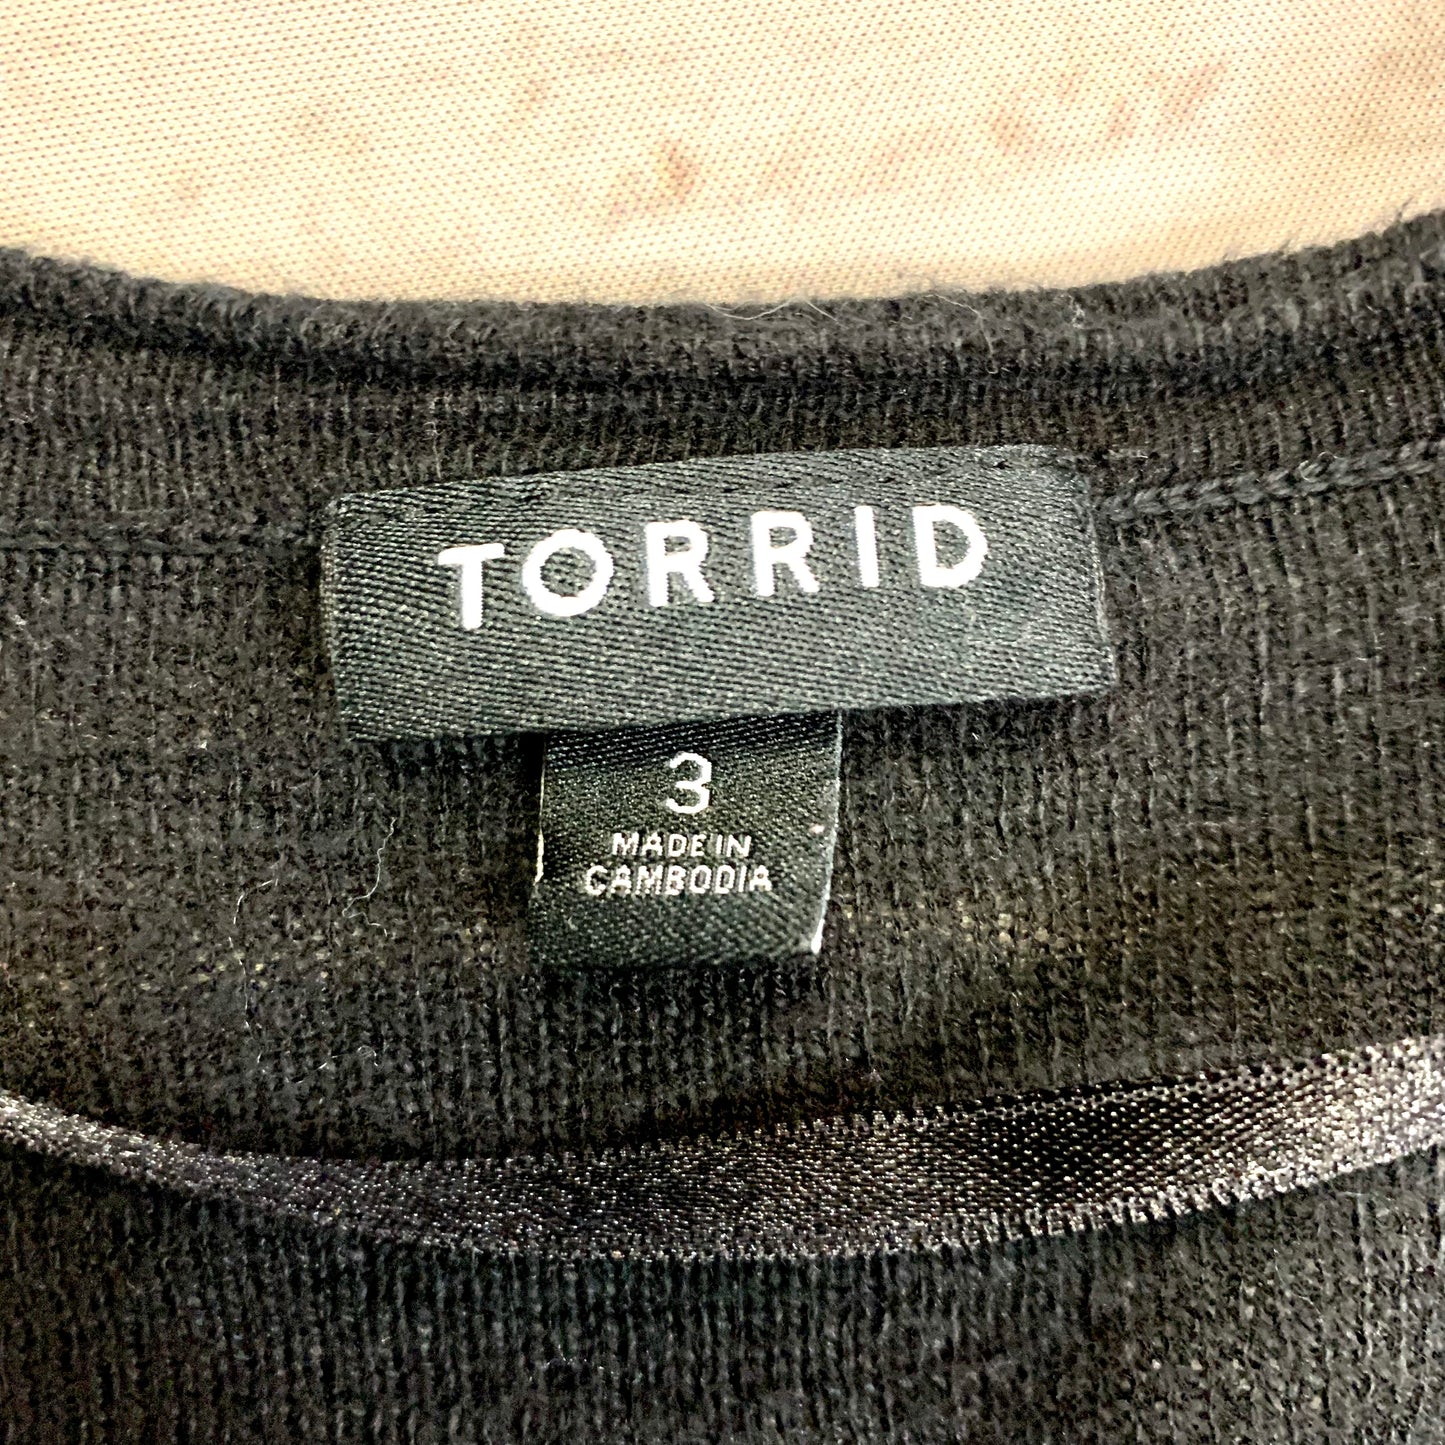 Sweater Cardigan By Torrid  Size: 3x